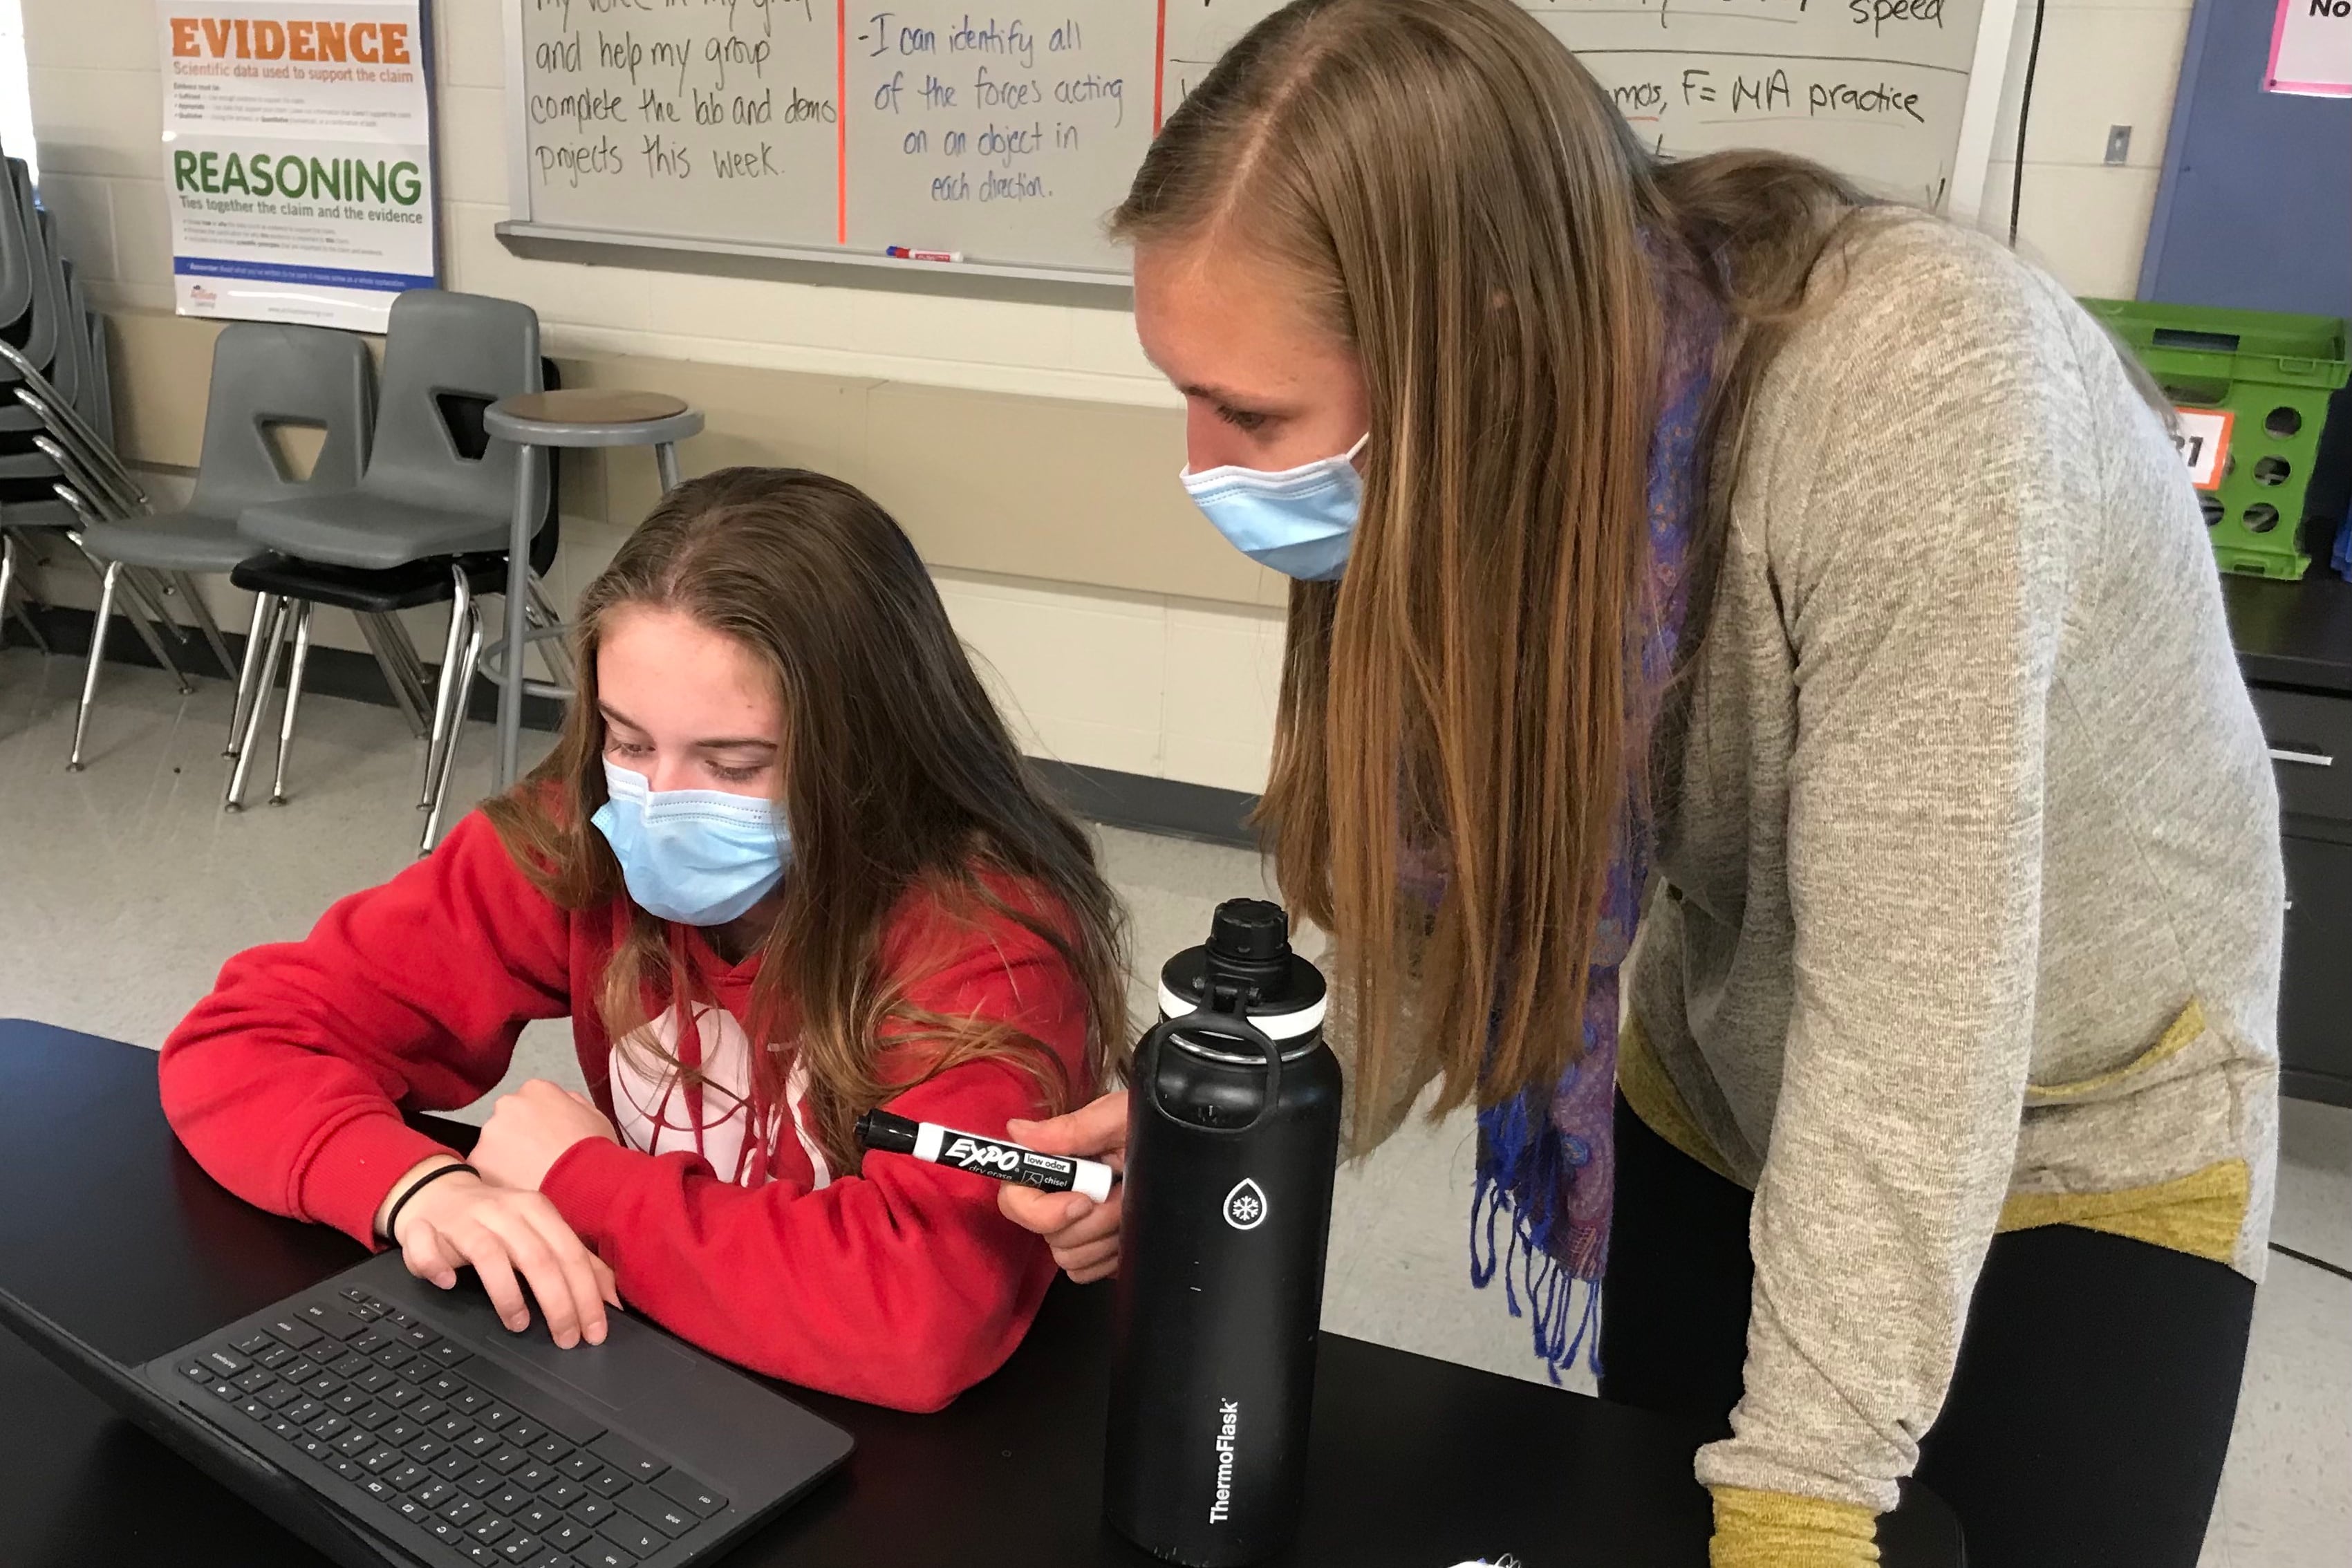 A masked teacher leans over to help a masked middle school student looking at a laptop.